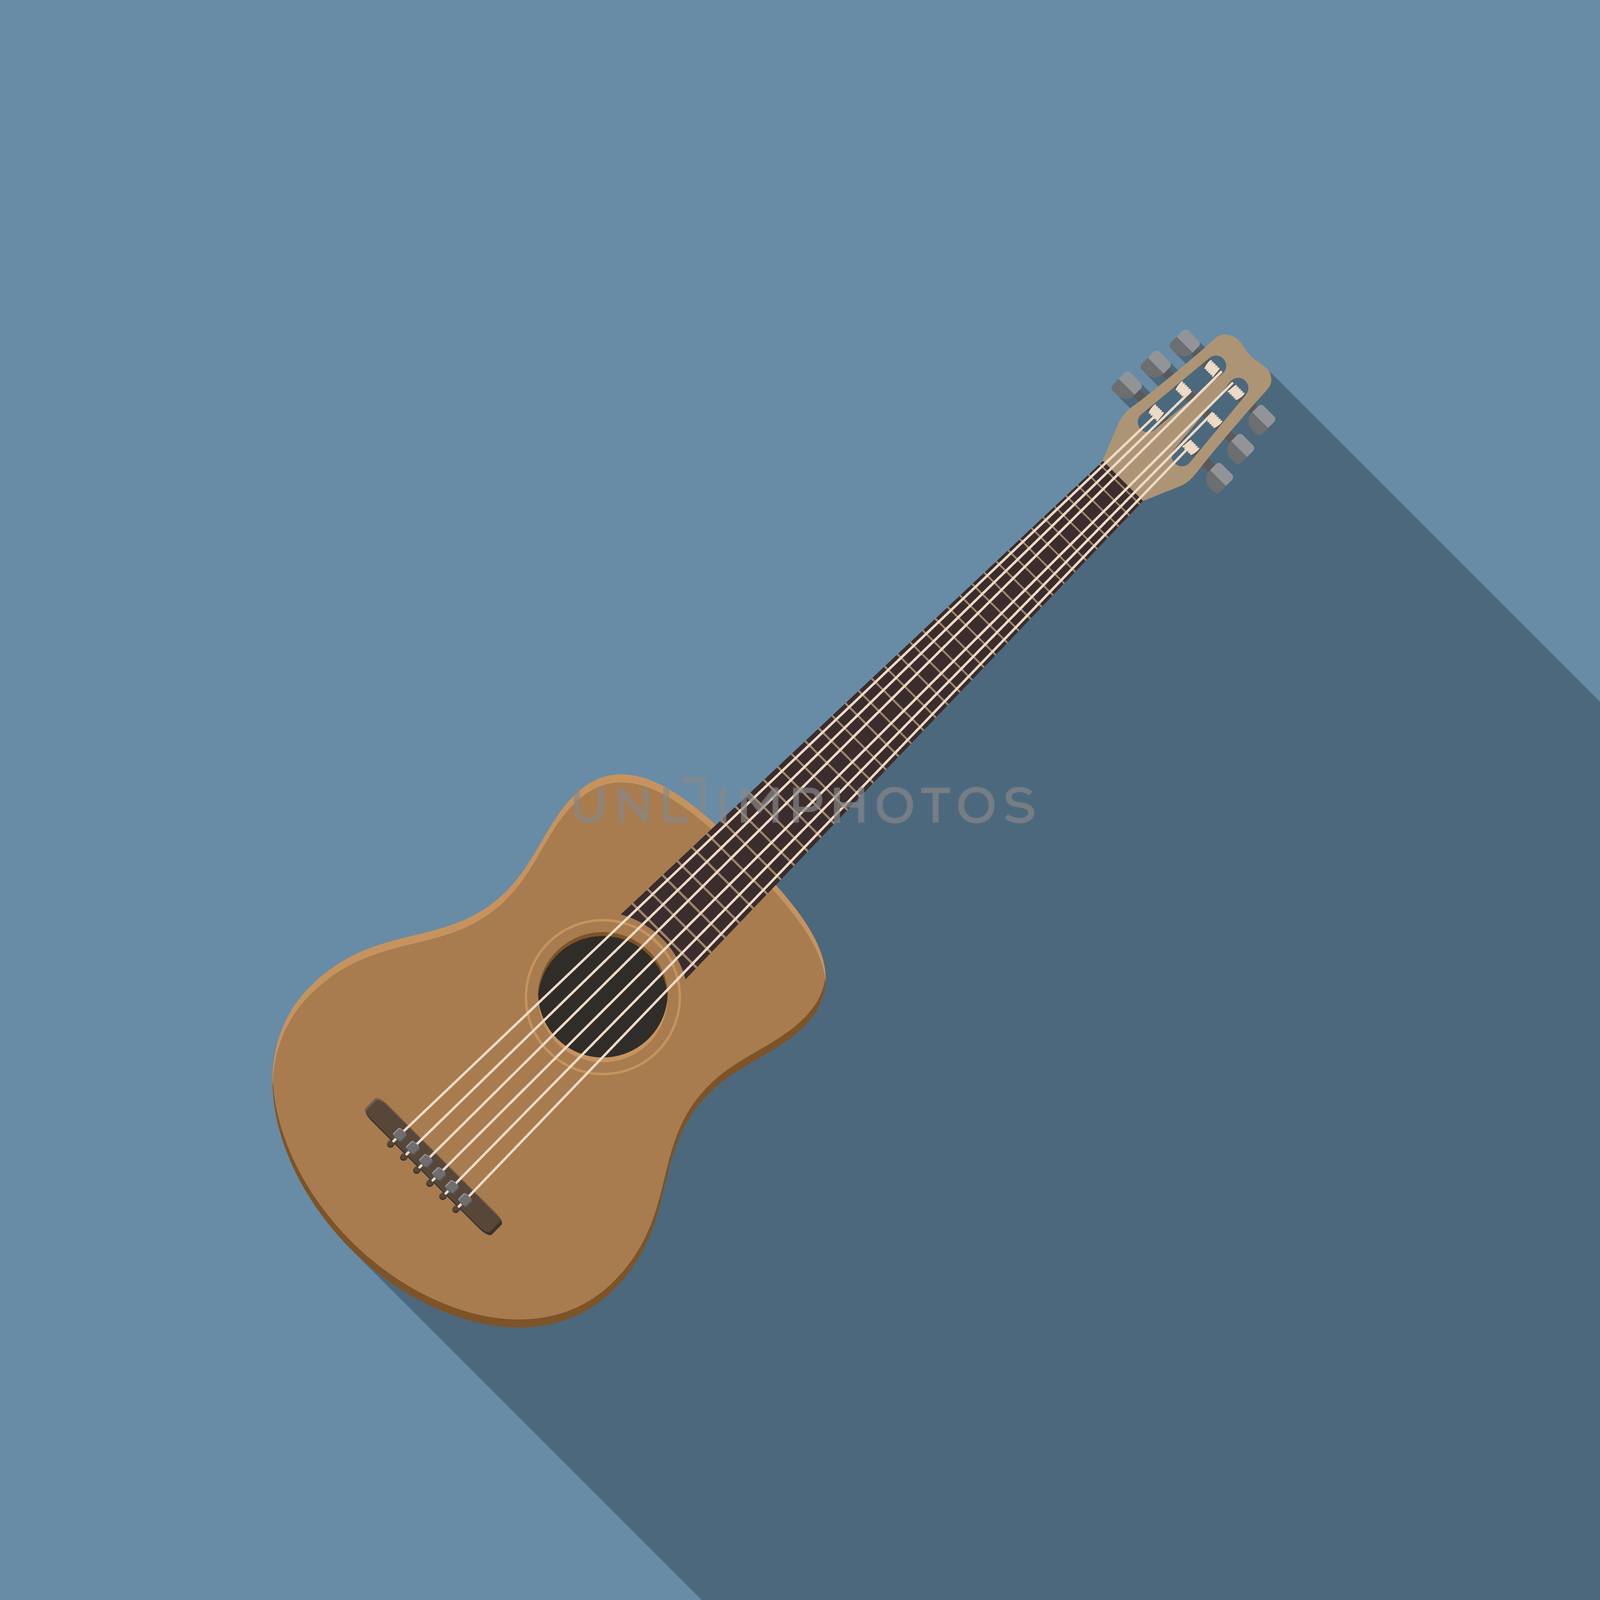 Flat design modern vector illustration of acoustic guitar icon, music instrument with long shadow by Lemon_workshop